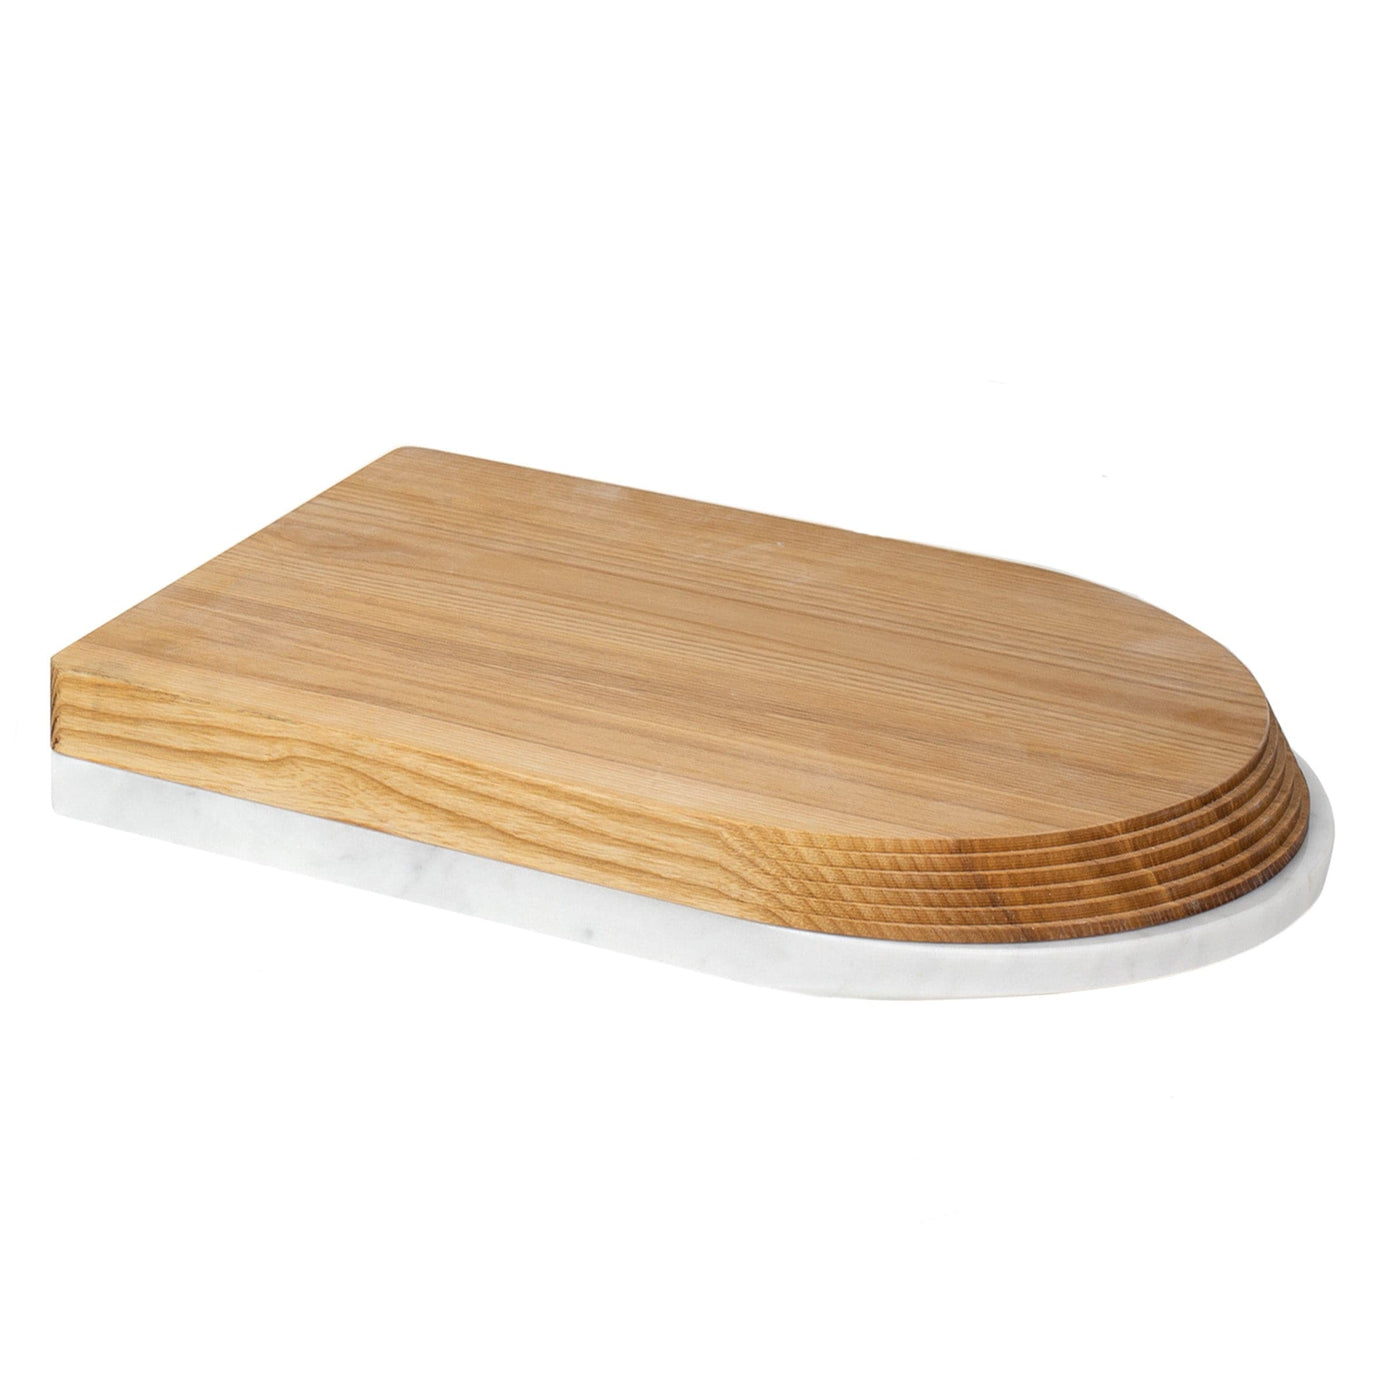 Marble and Ash Wood Cutting Board TAGLIERE 1 01